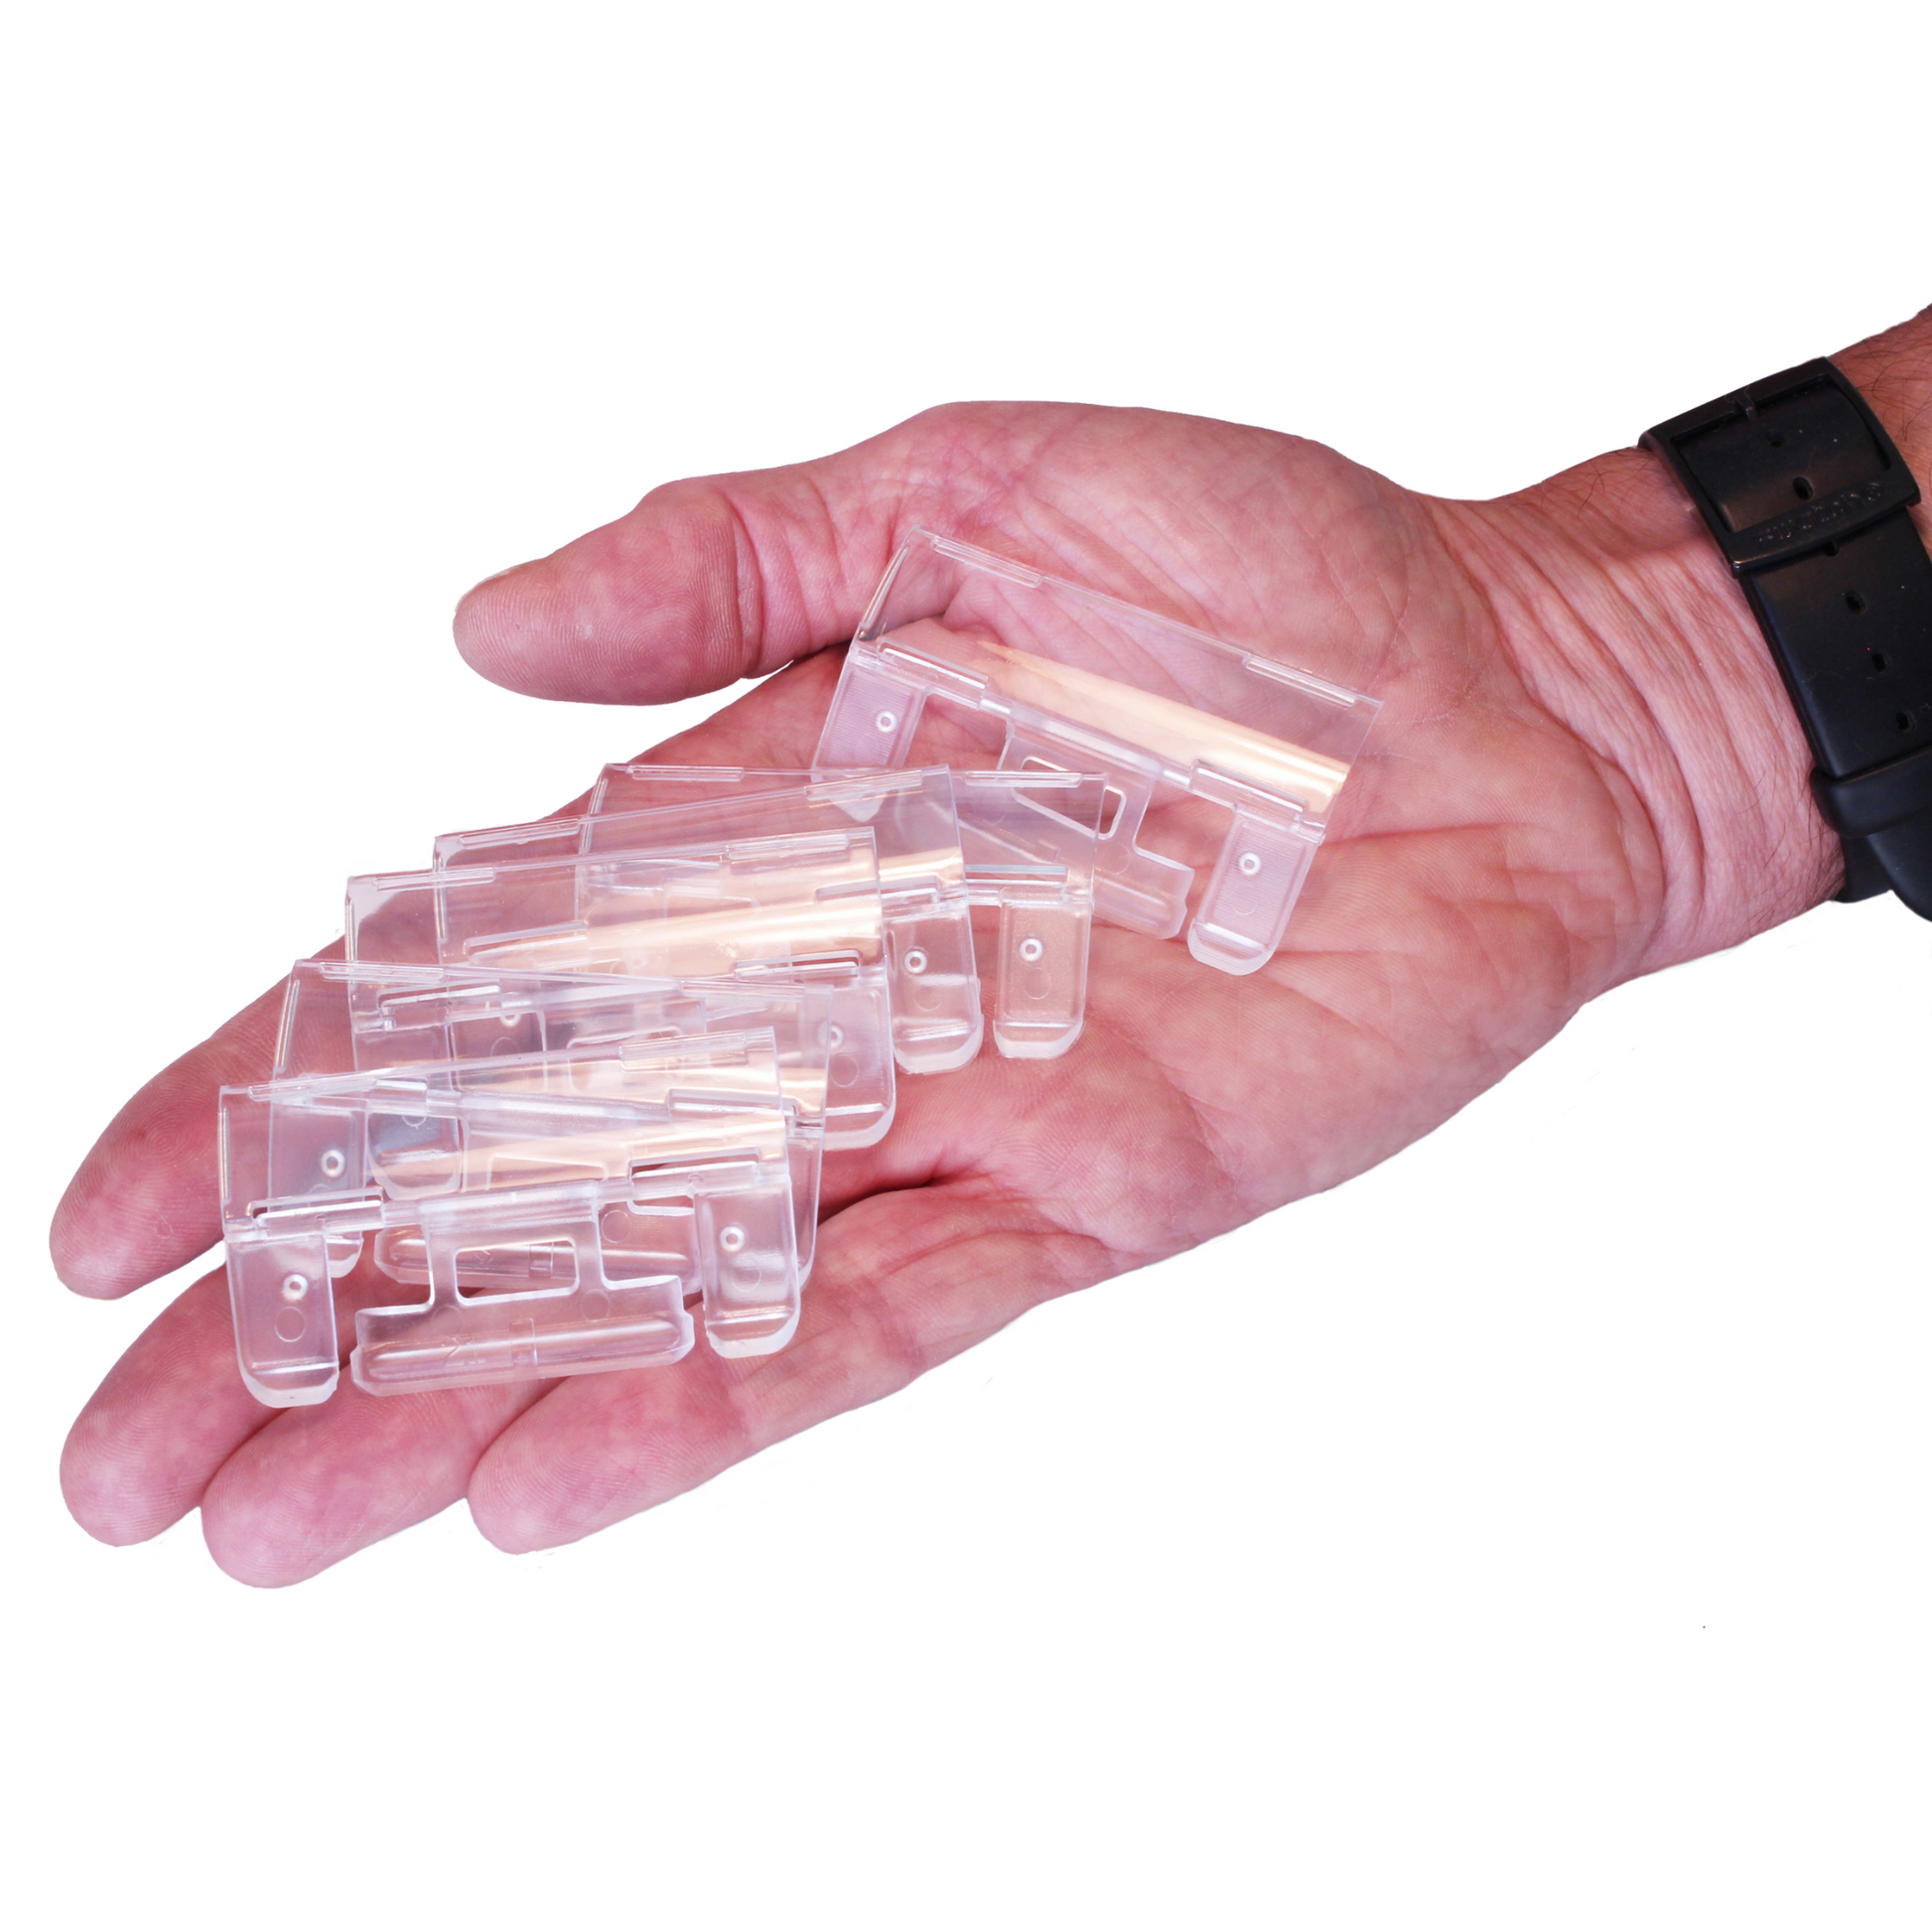 An open human hand displaying several clear plastic filing tabs, part of an office organization system for filing documents.